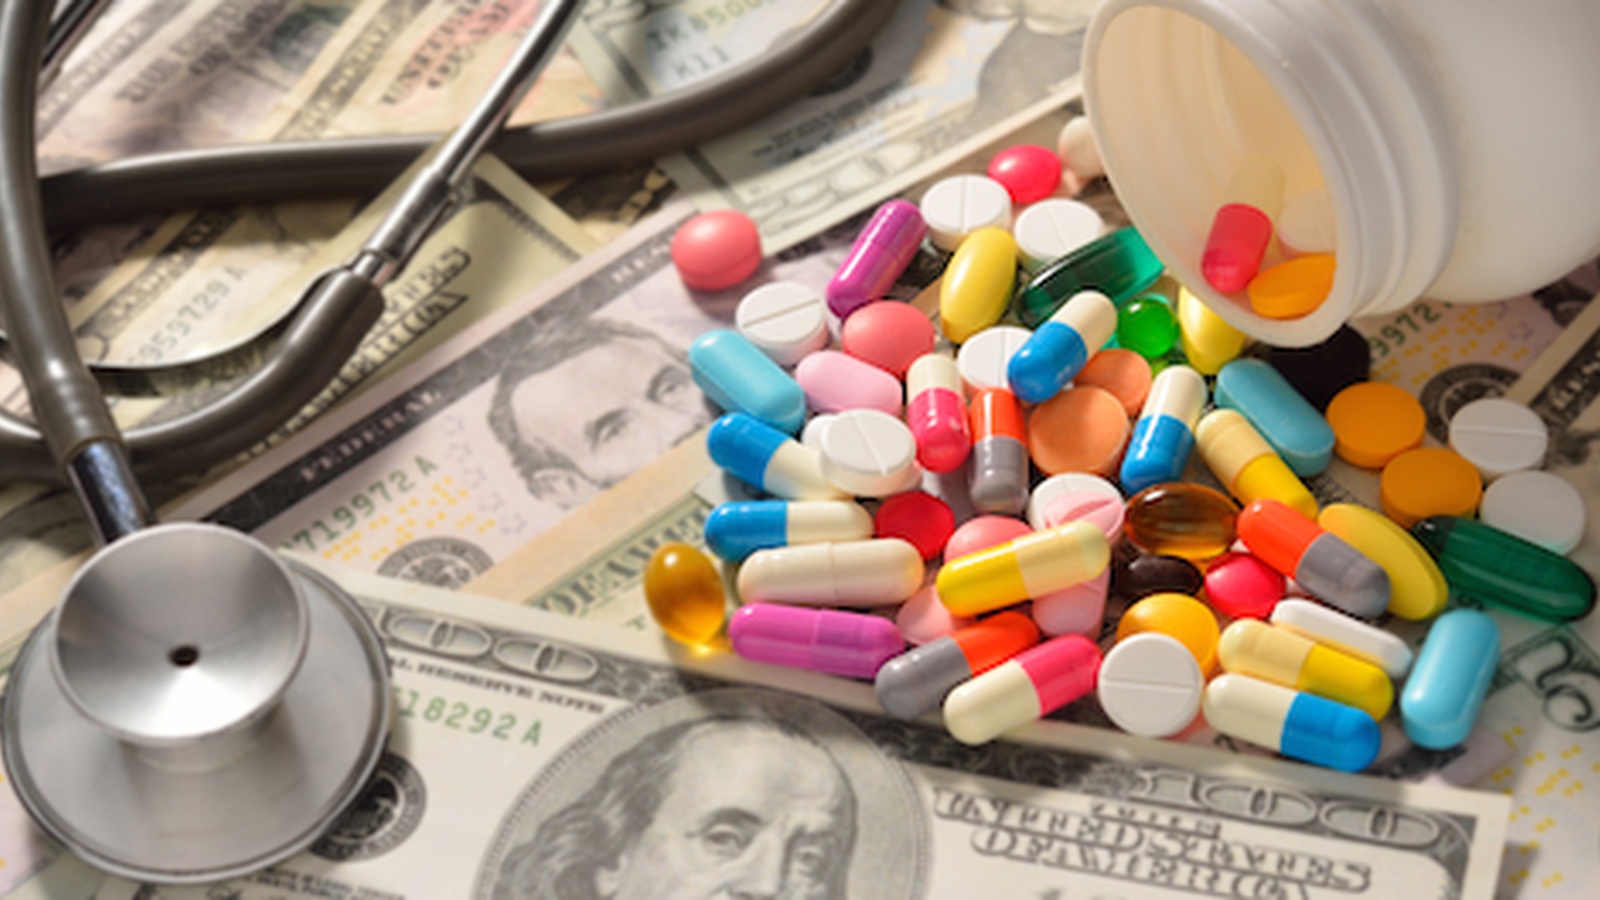 15 Most Dangerous Drugs Big Pharma Don't Want You to Know About